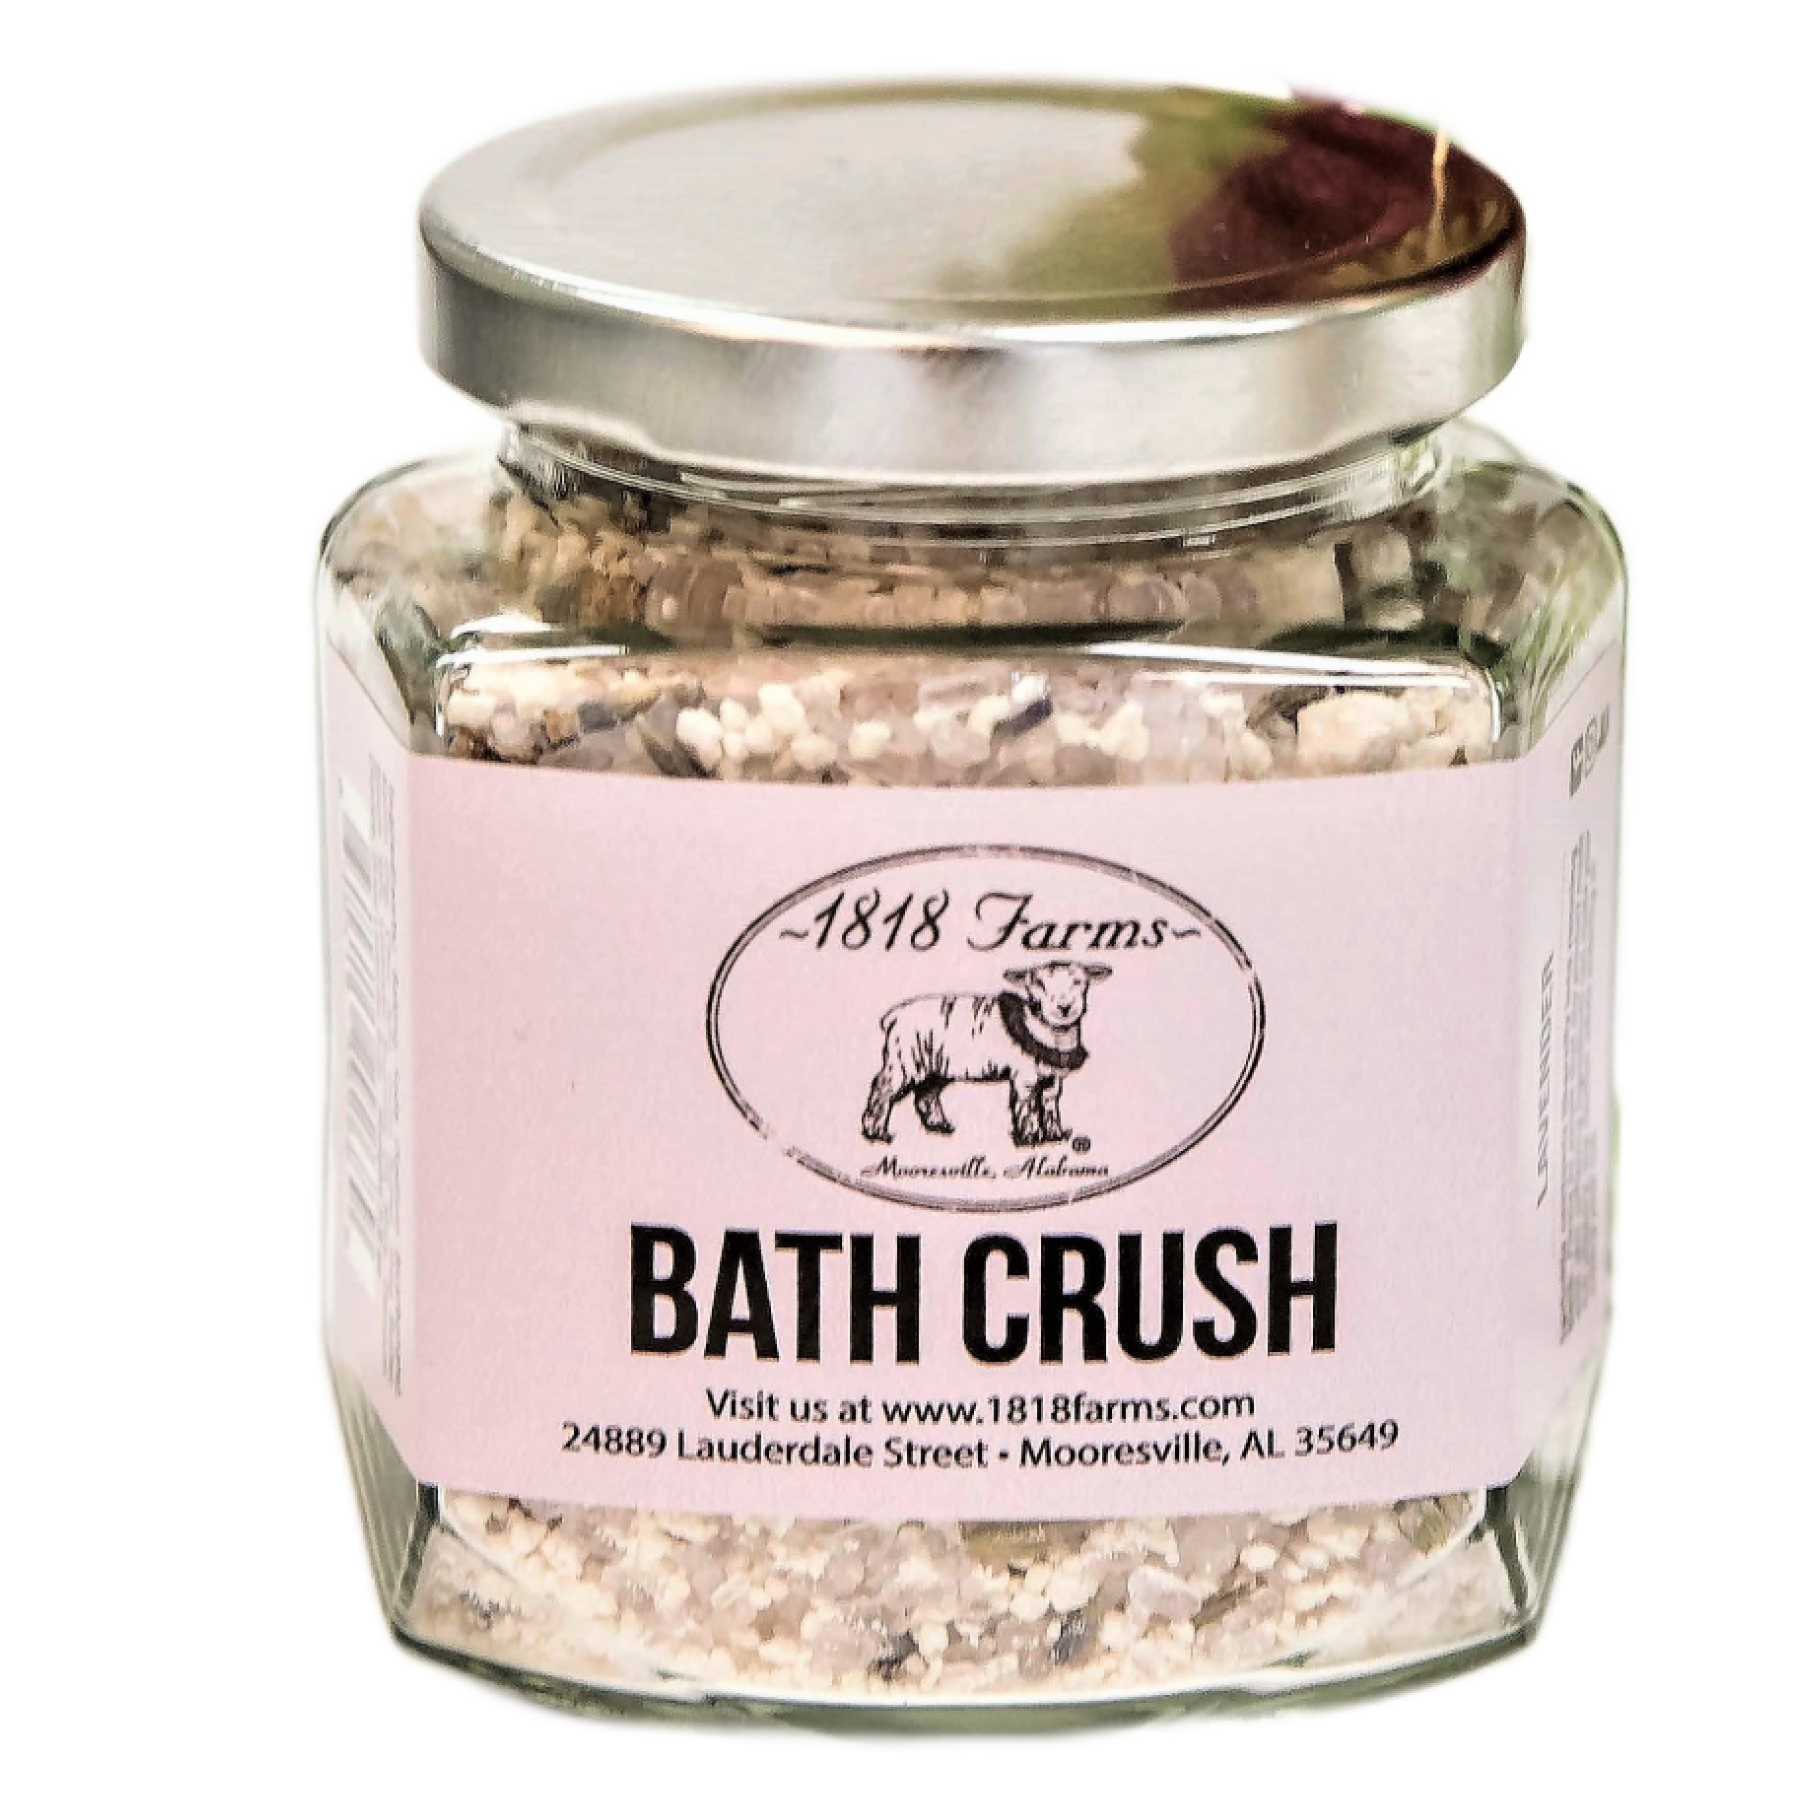 Rose Petal For Bath - Best Price in Singapore - Oct 2023